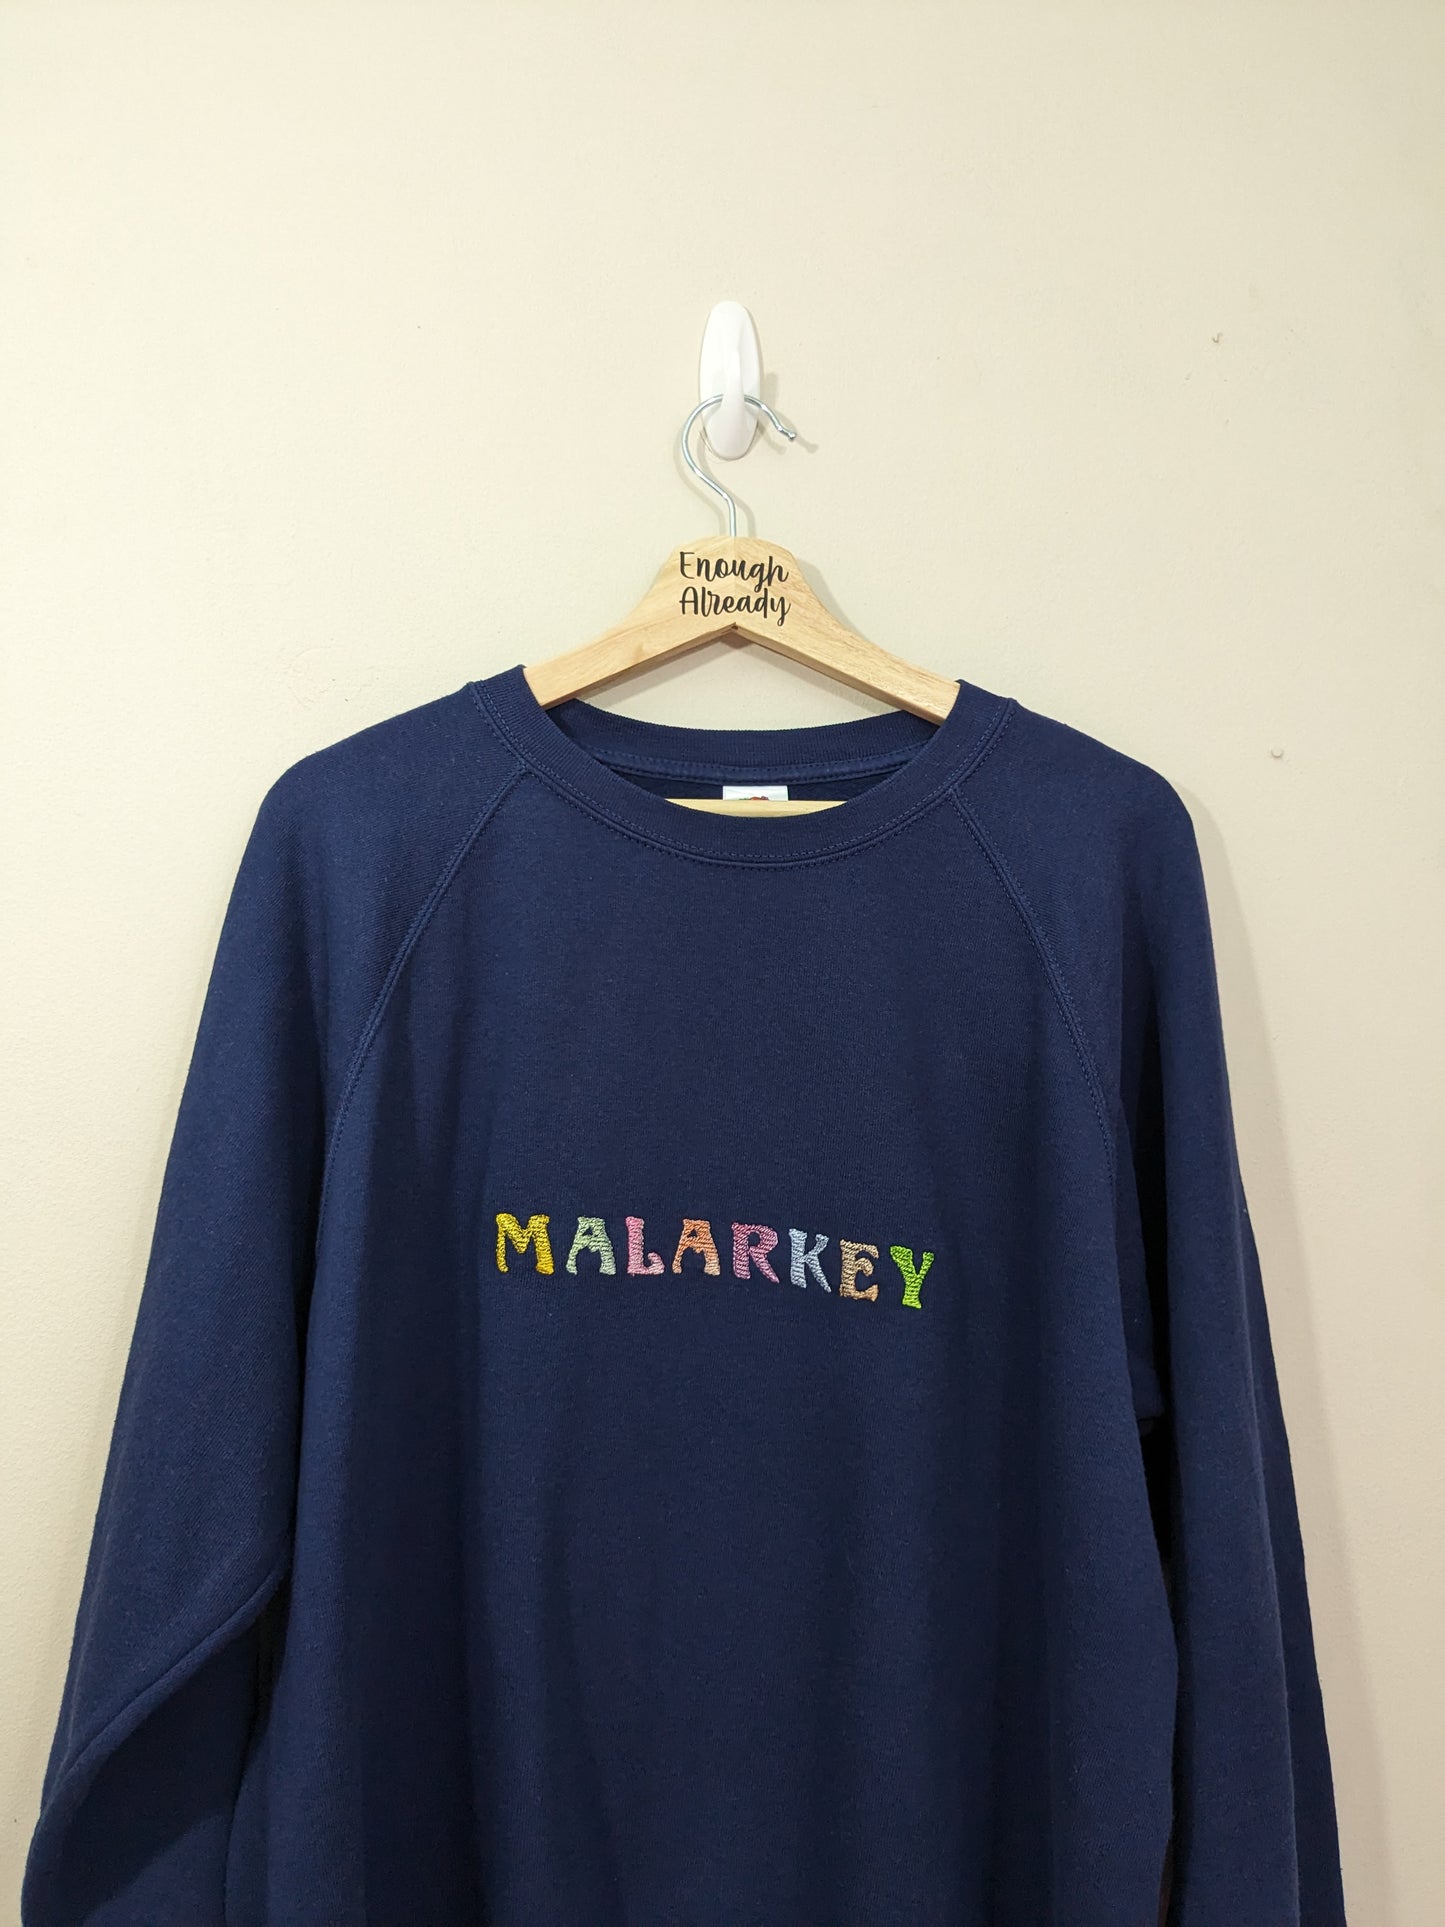 Size Large Reworked Navy Sweatshirt with Embroidered Malarkey Design - Ridiculous English Words Collection